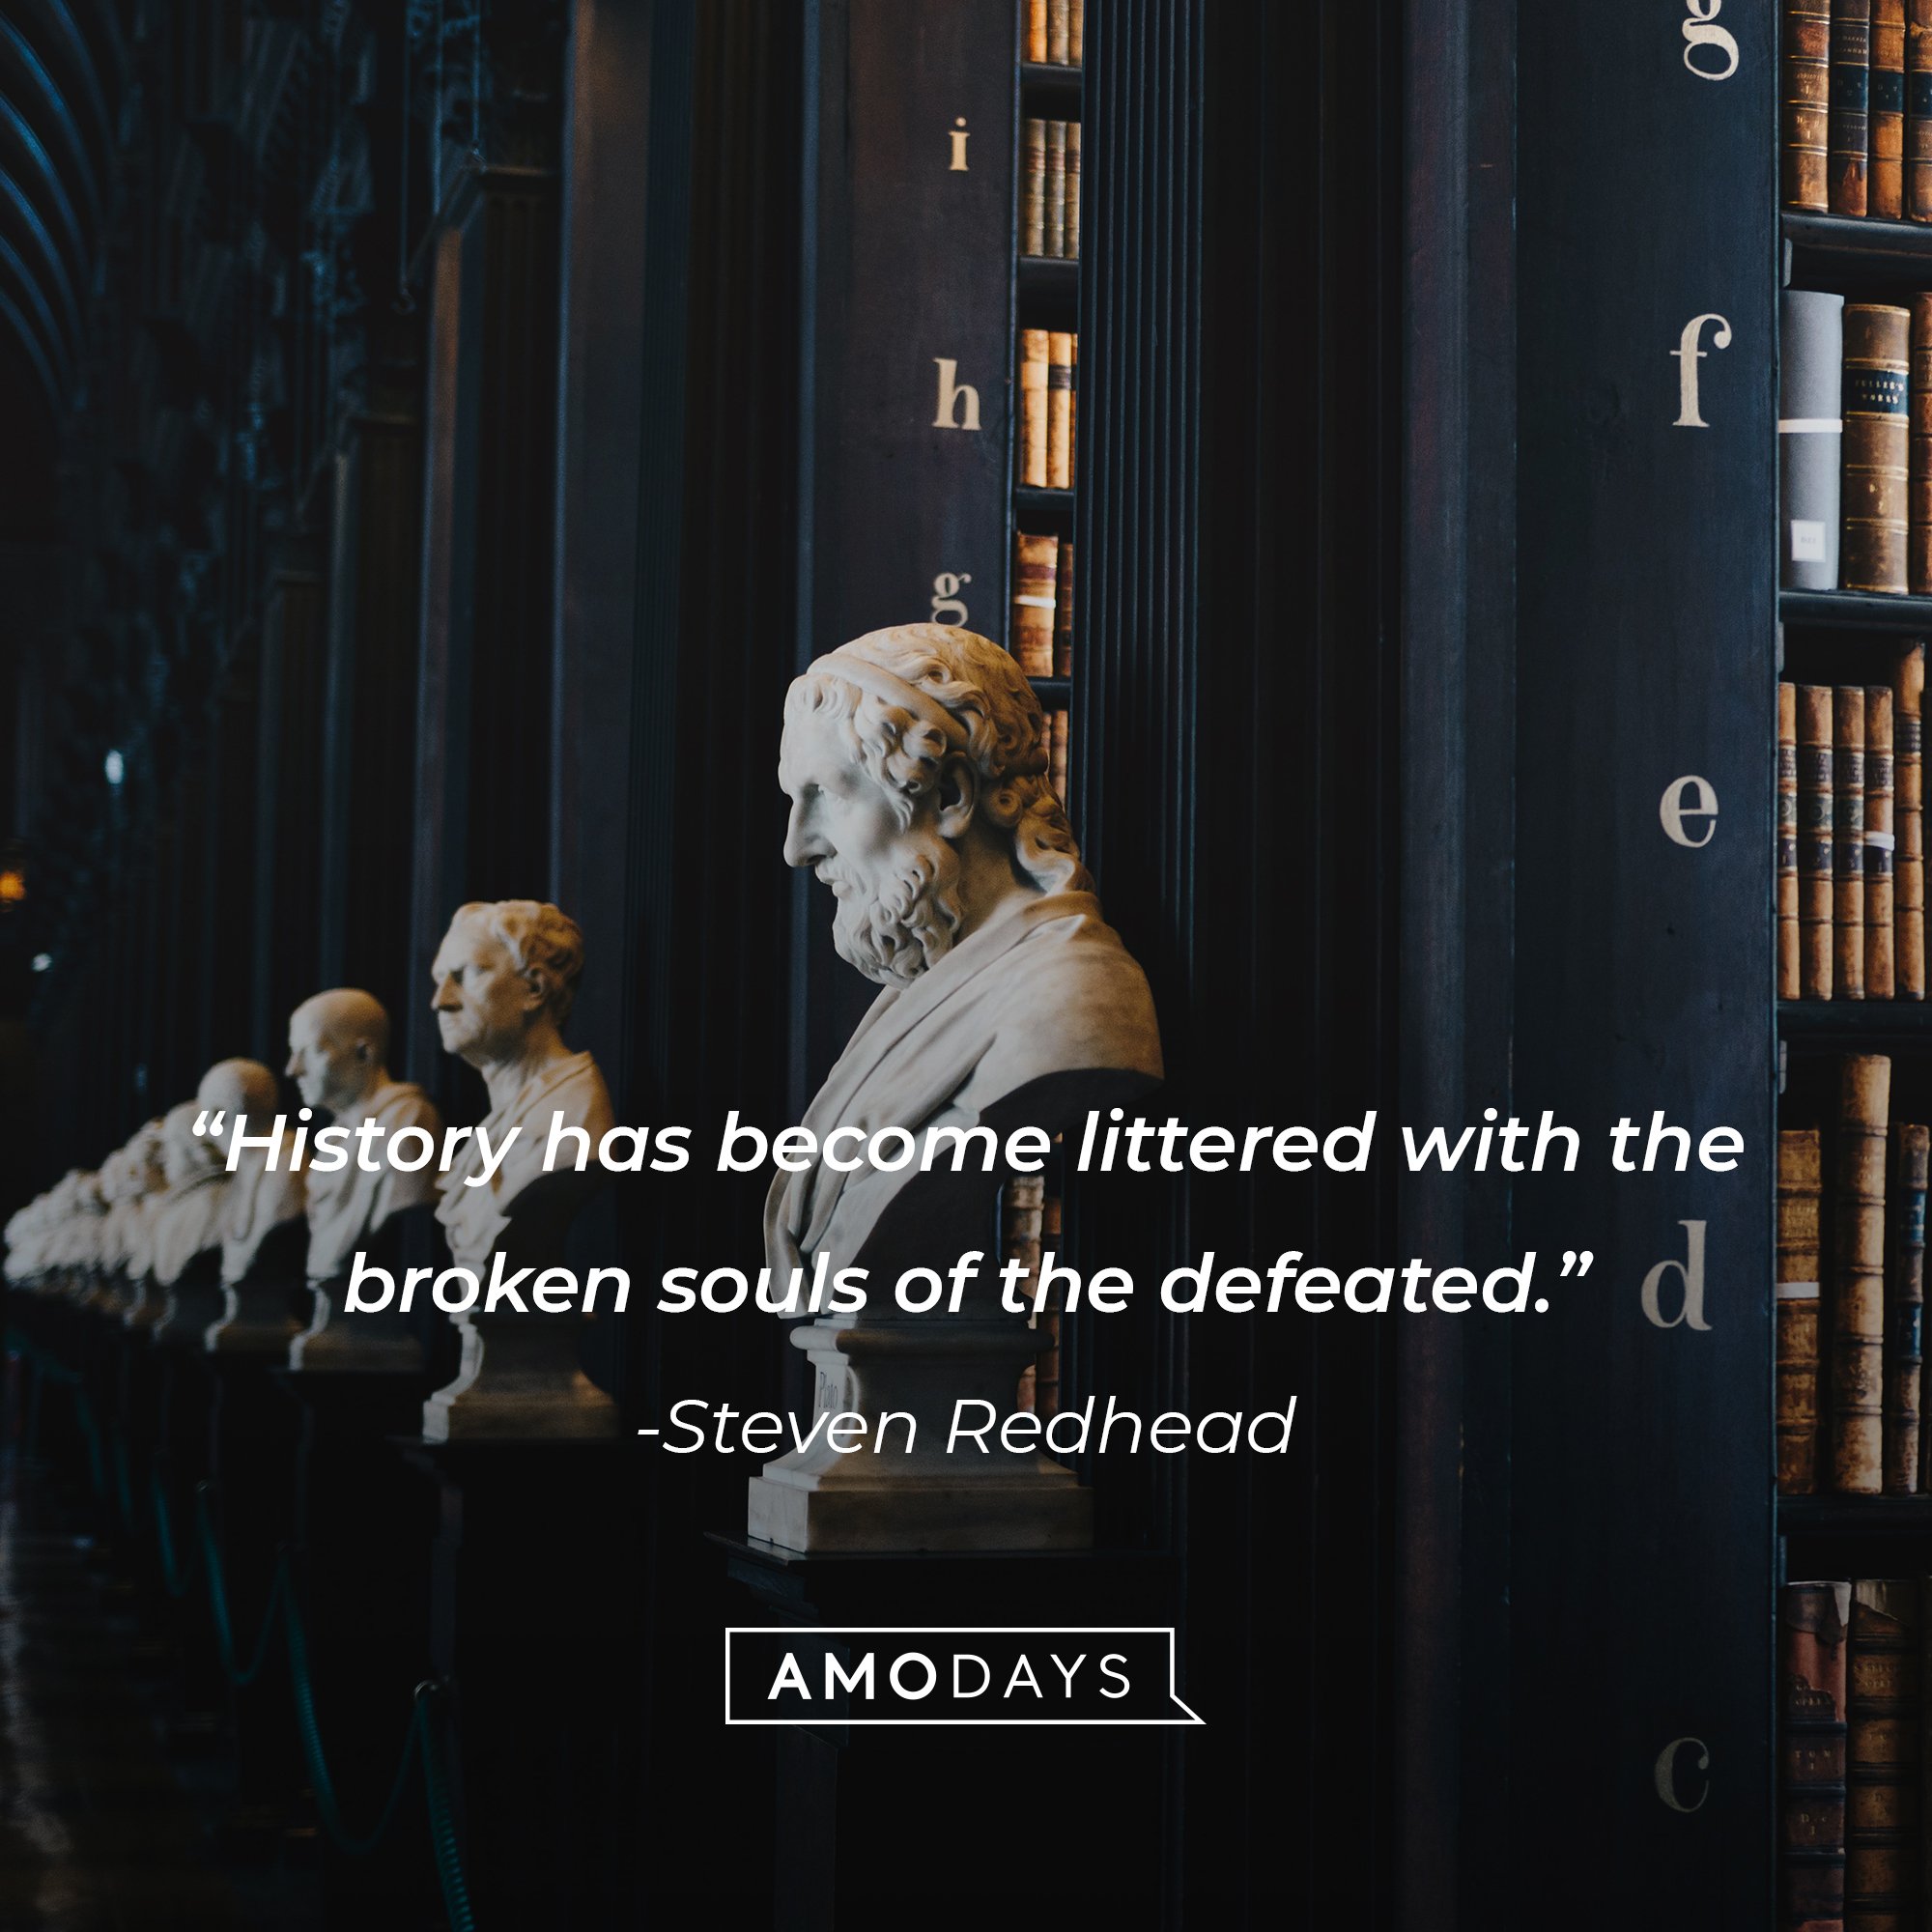 Steven Redhead's quote: "History has become littered with the broken souls of the defeated." | Image: AmoDays